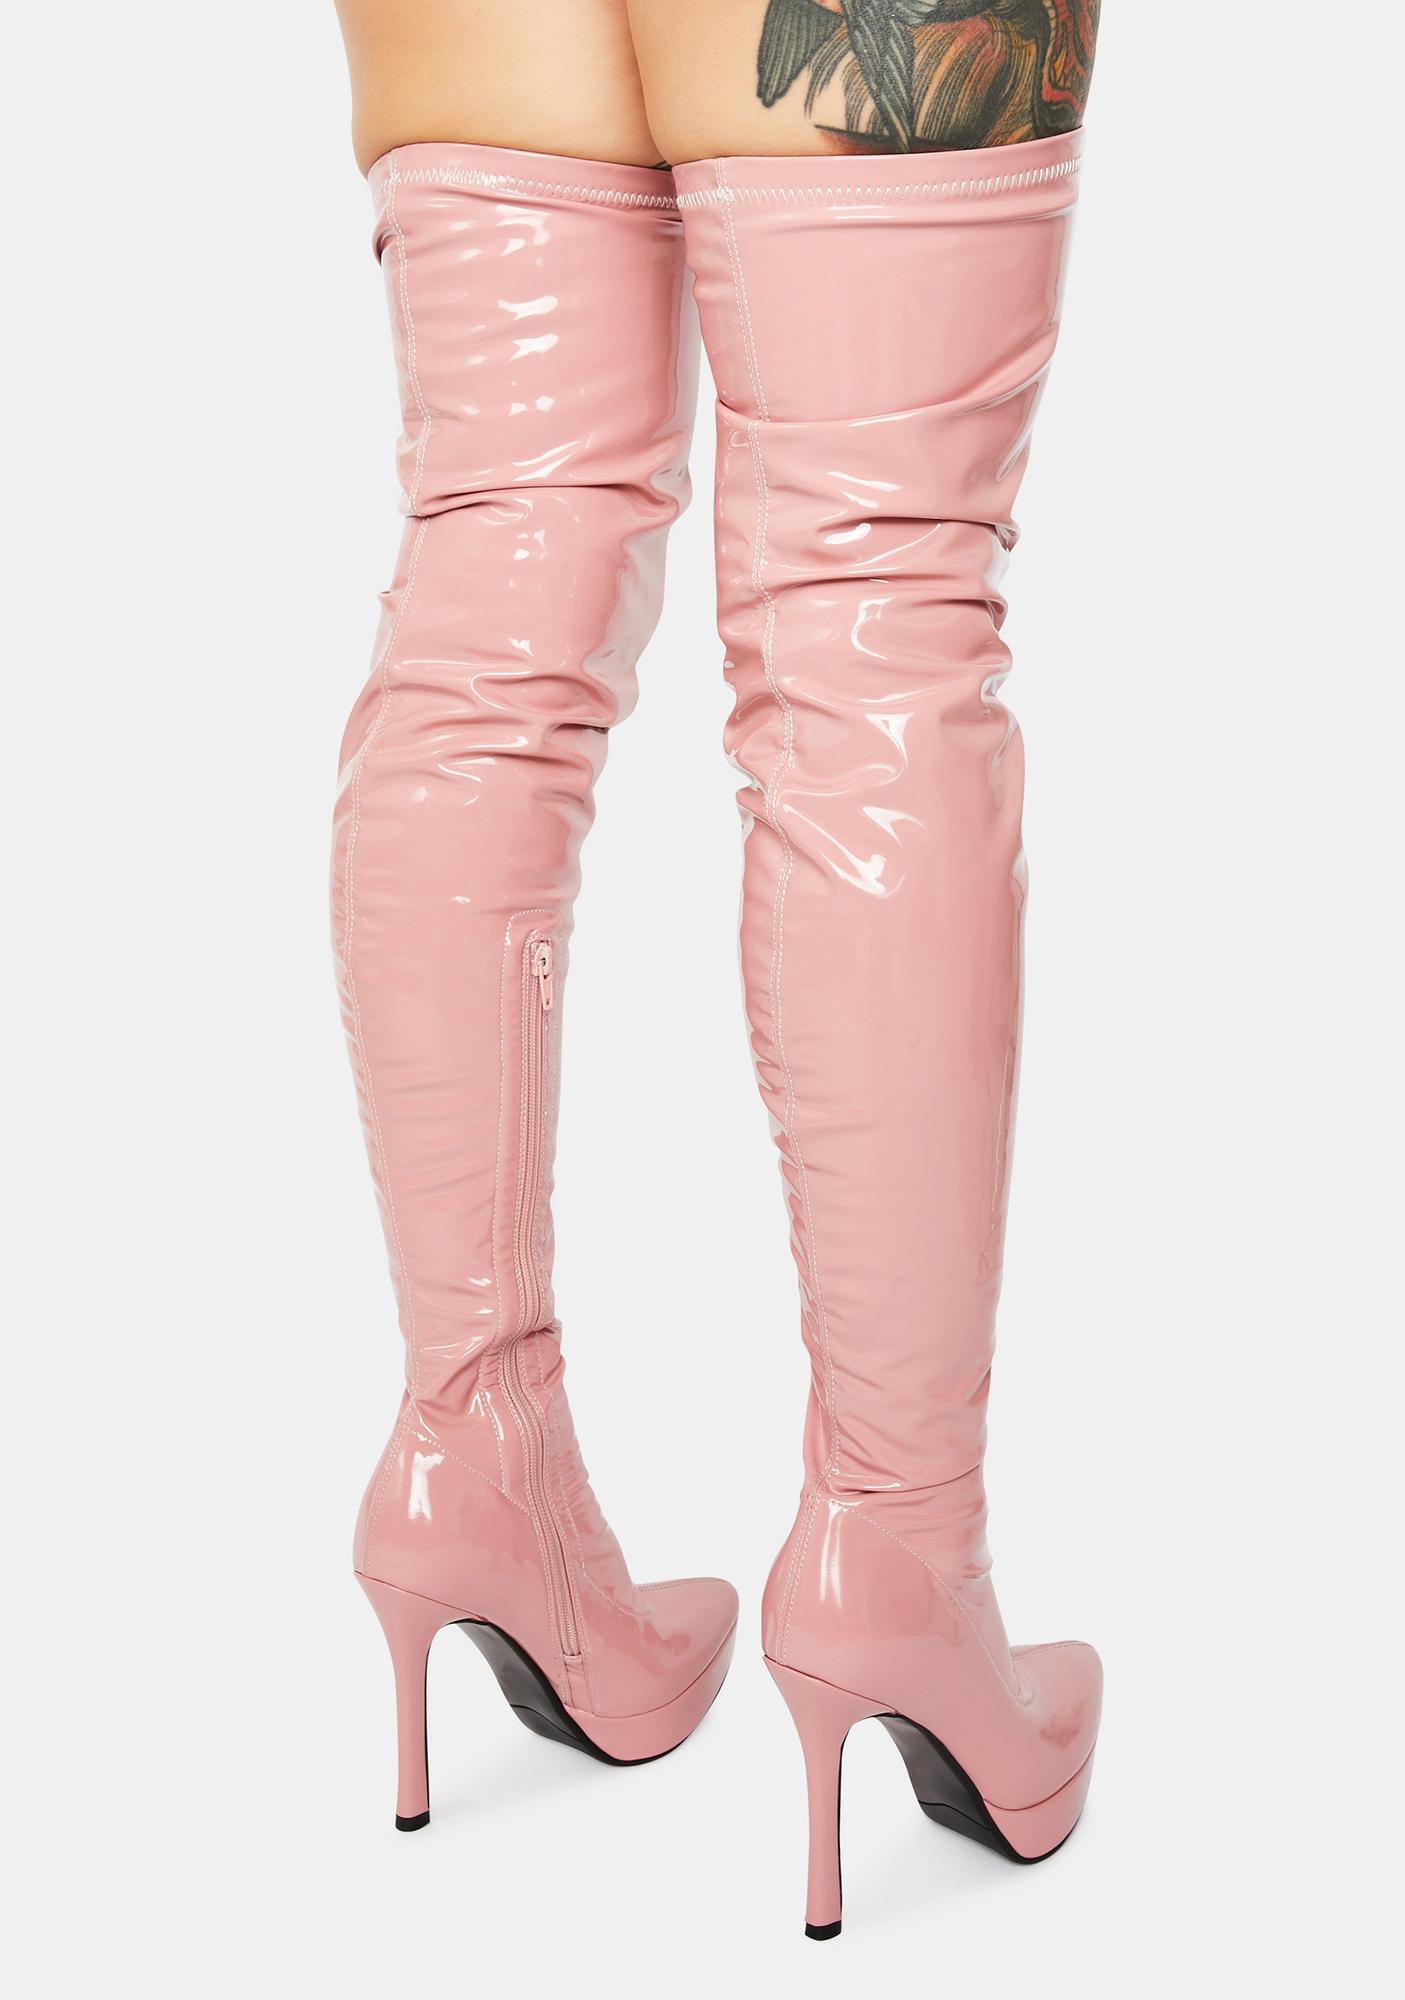 pink patent thigh high boots